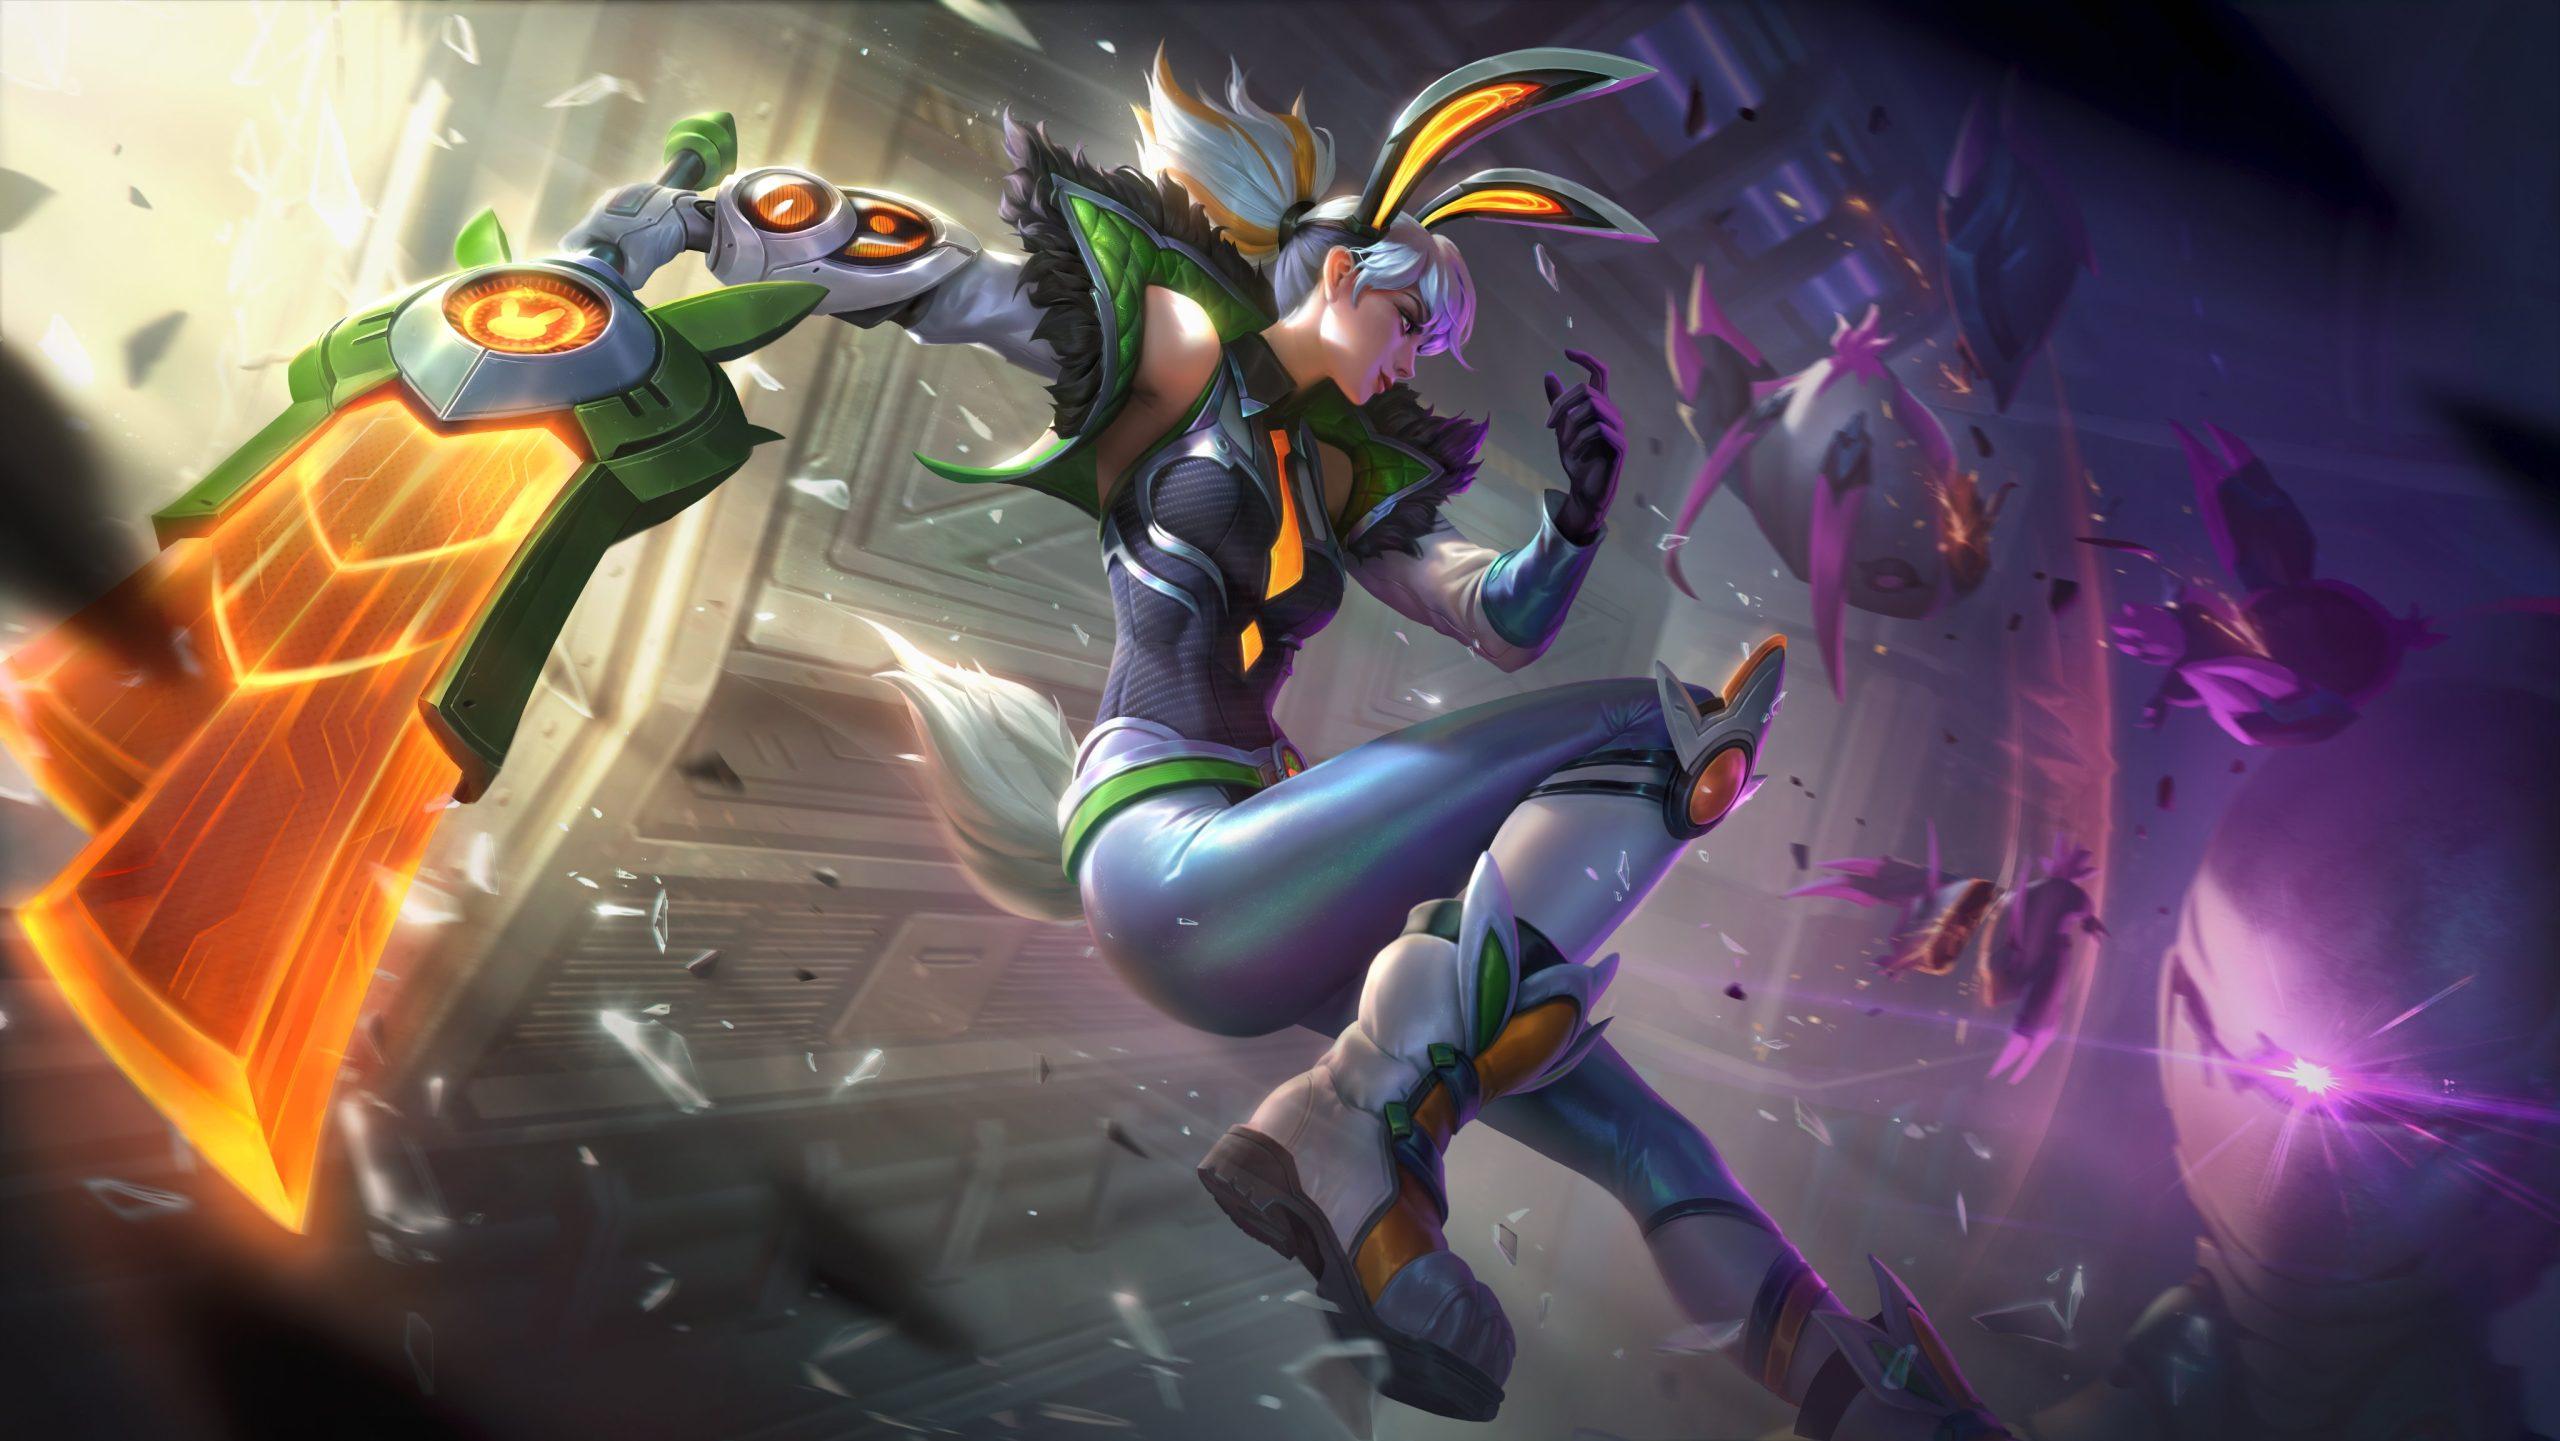 New Anima Squad skins for Jinx, Riven, more have been revealed